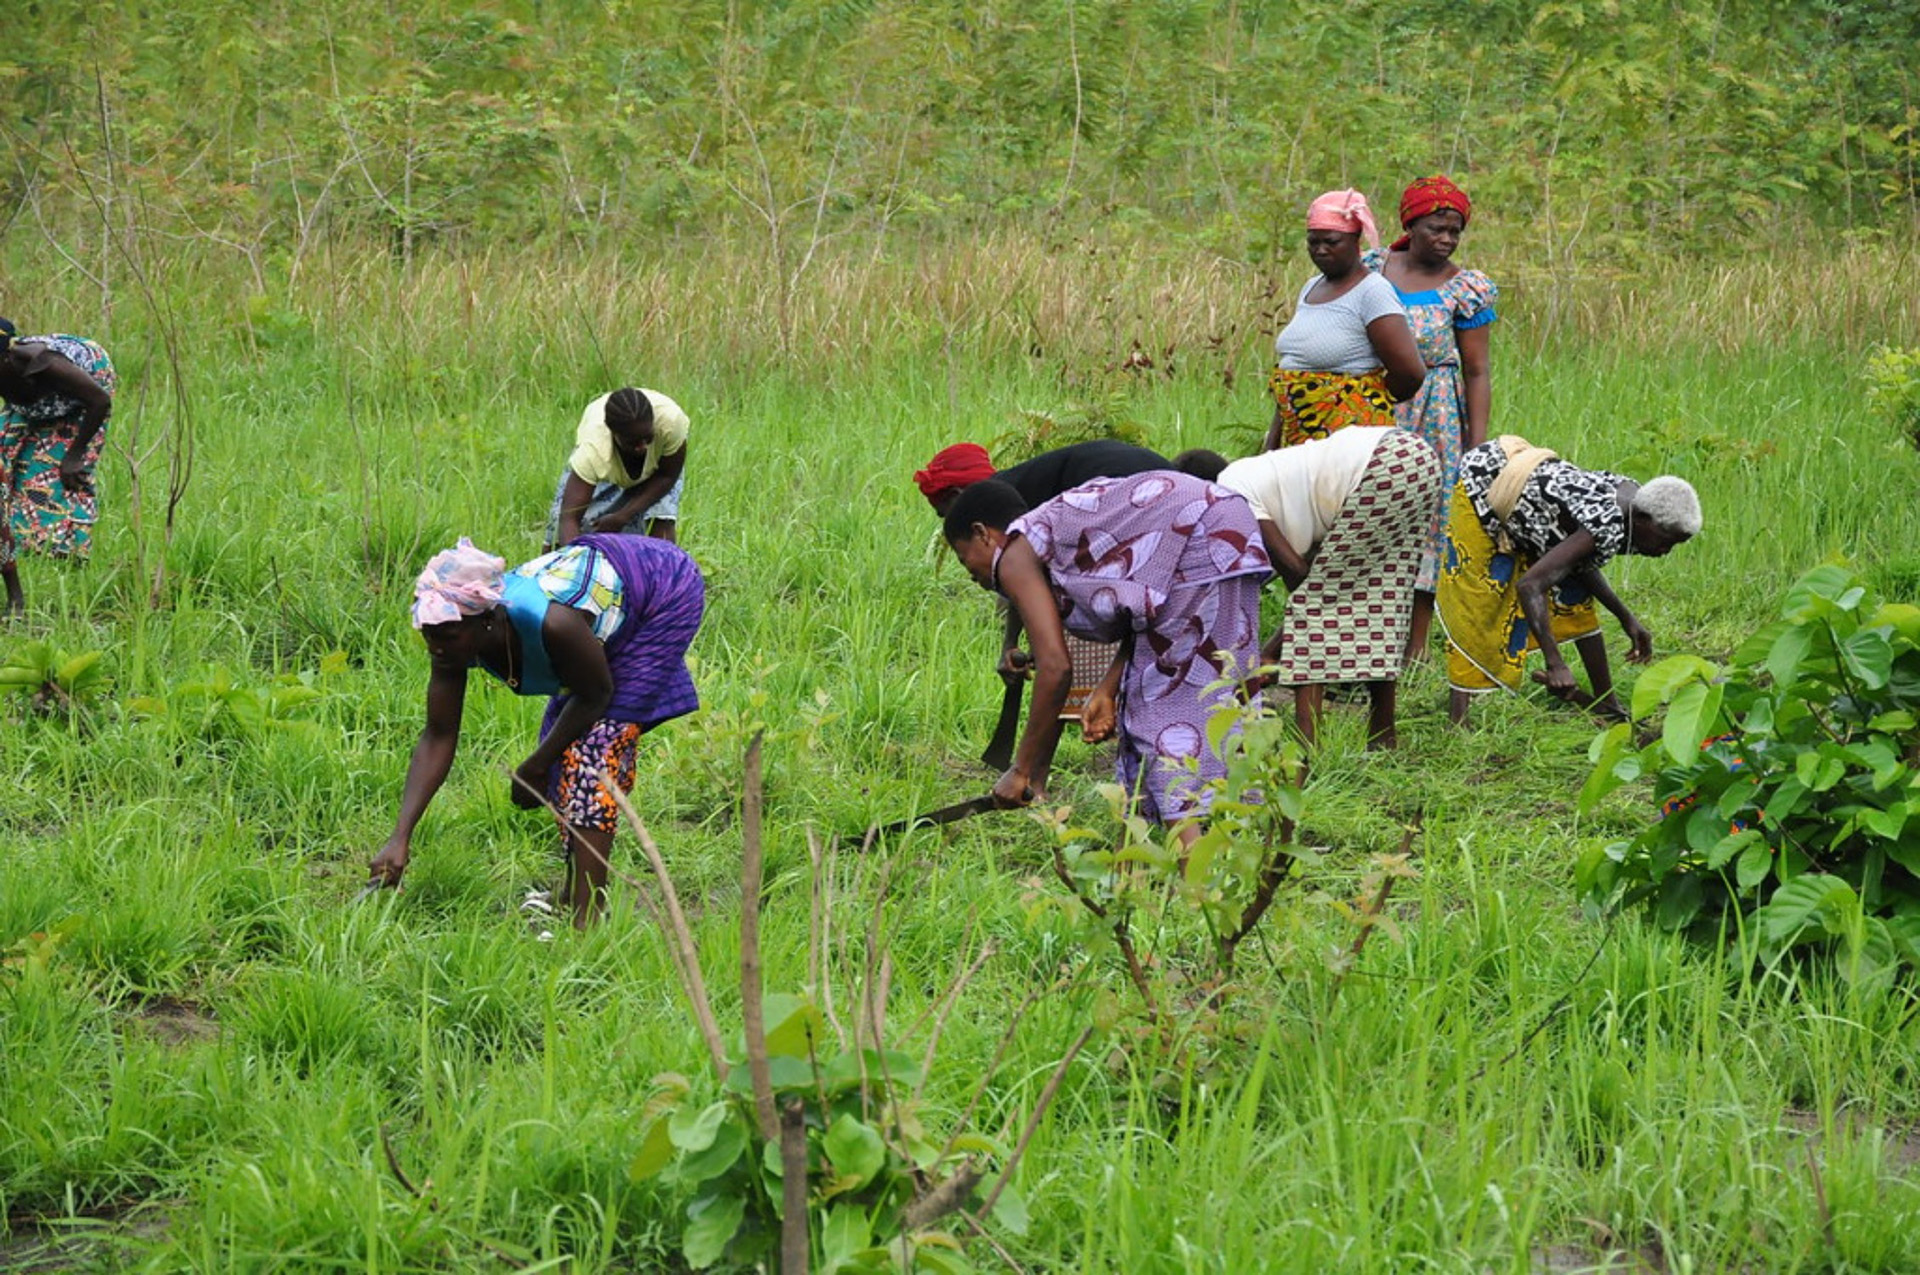 Replanting efforts in Cote d'Ivoire